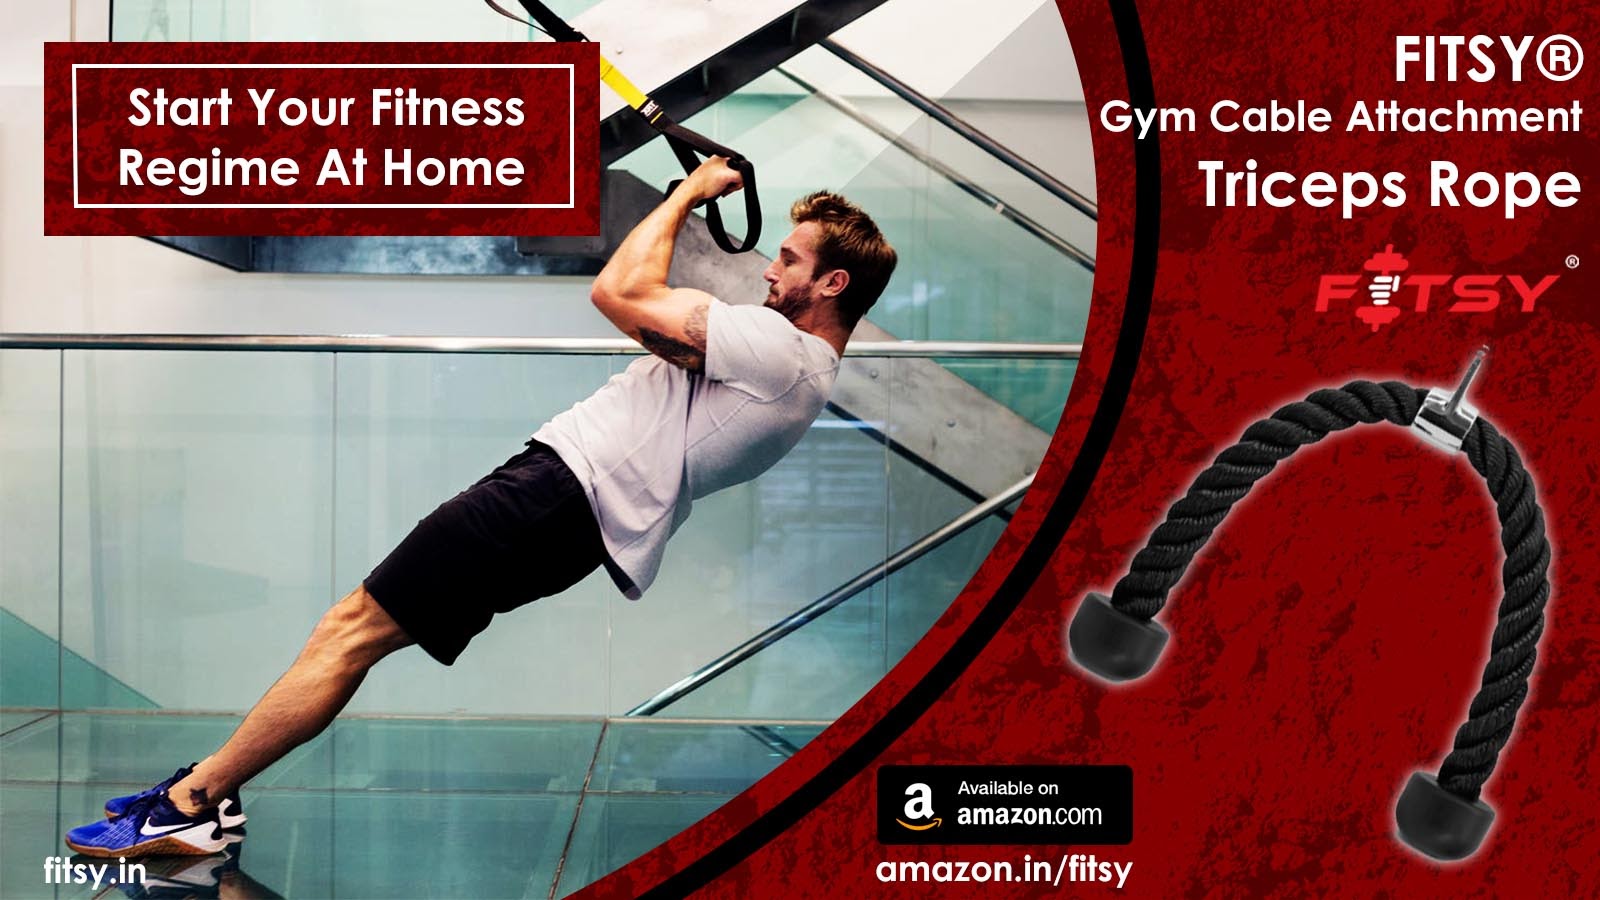 Start Your Fitness Regime At Home, In A Park, Or Anywhere You Want Without Joining A Gym!